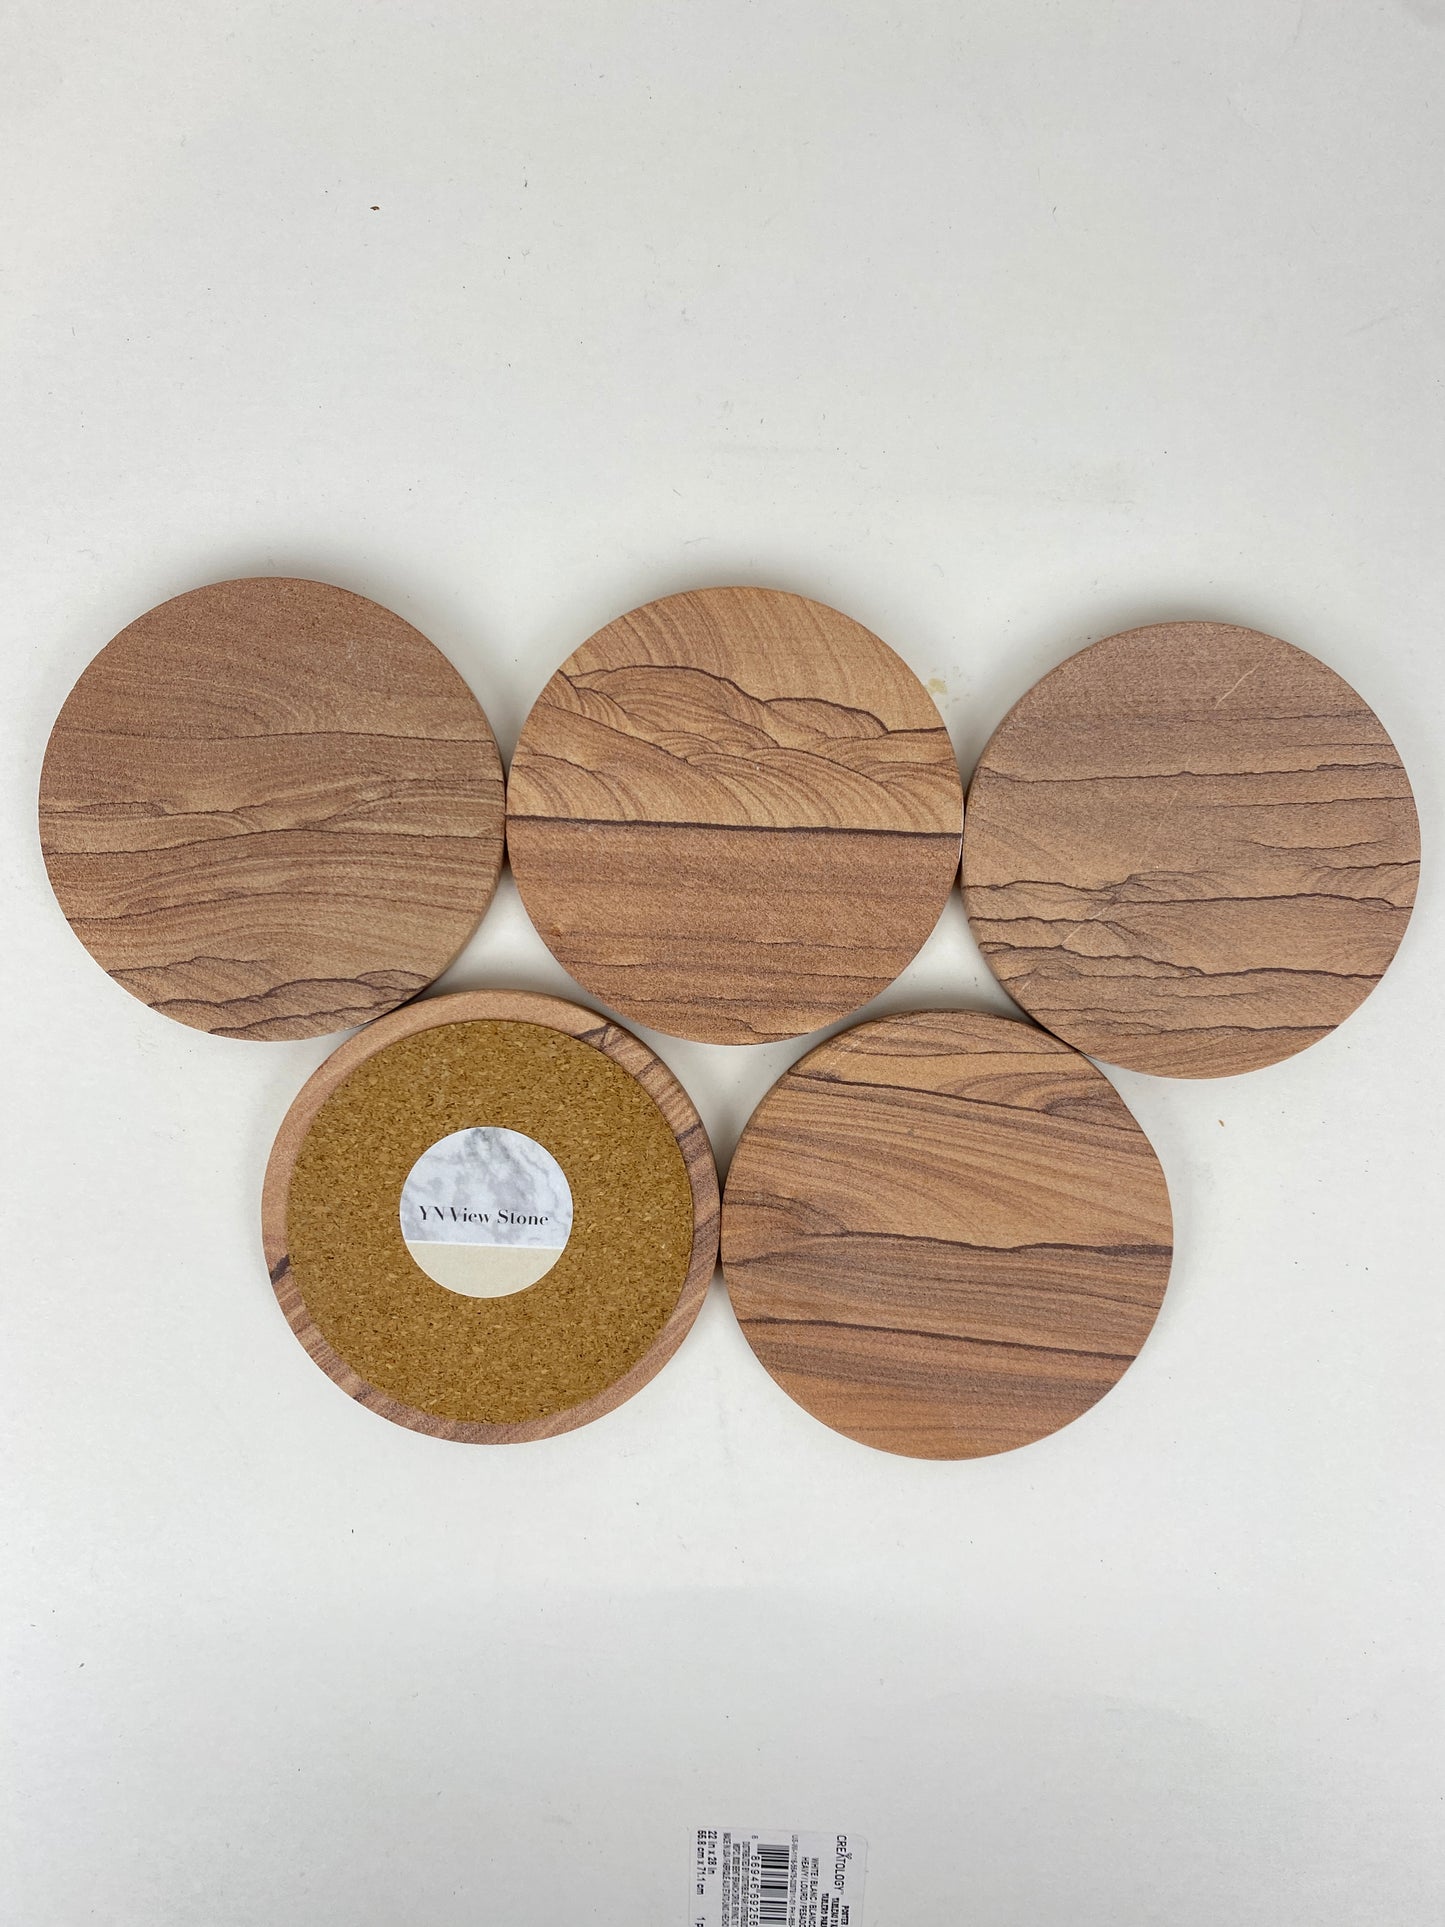 YN View Stone Drink Sandstone Coasters (5 Pc. Set) Thirsty Natural Stone Surface Protection